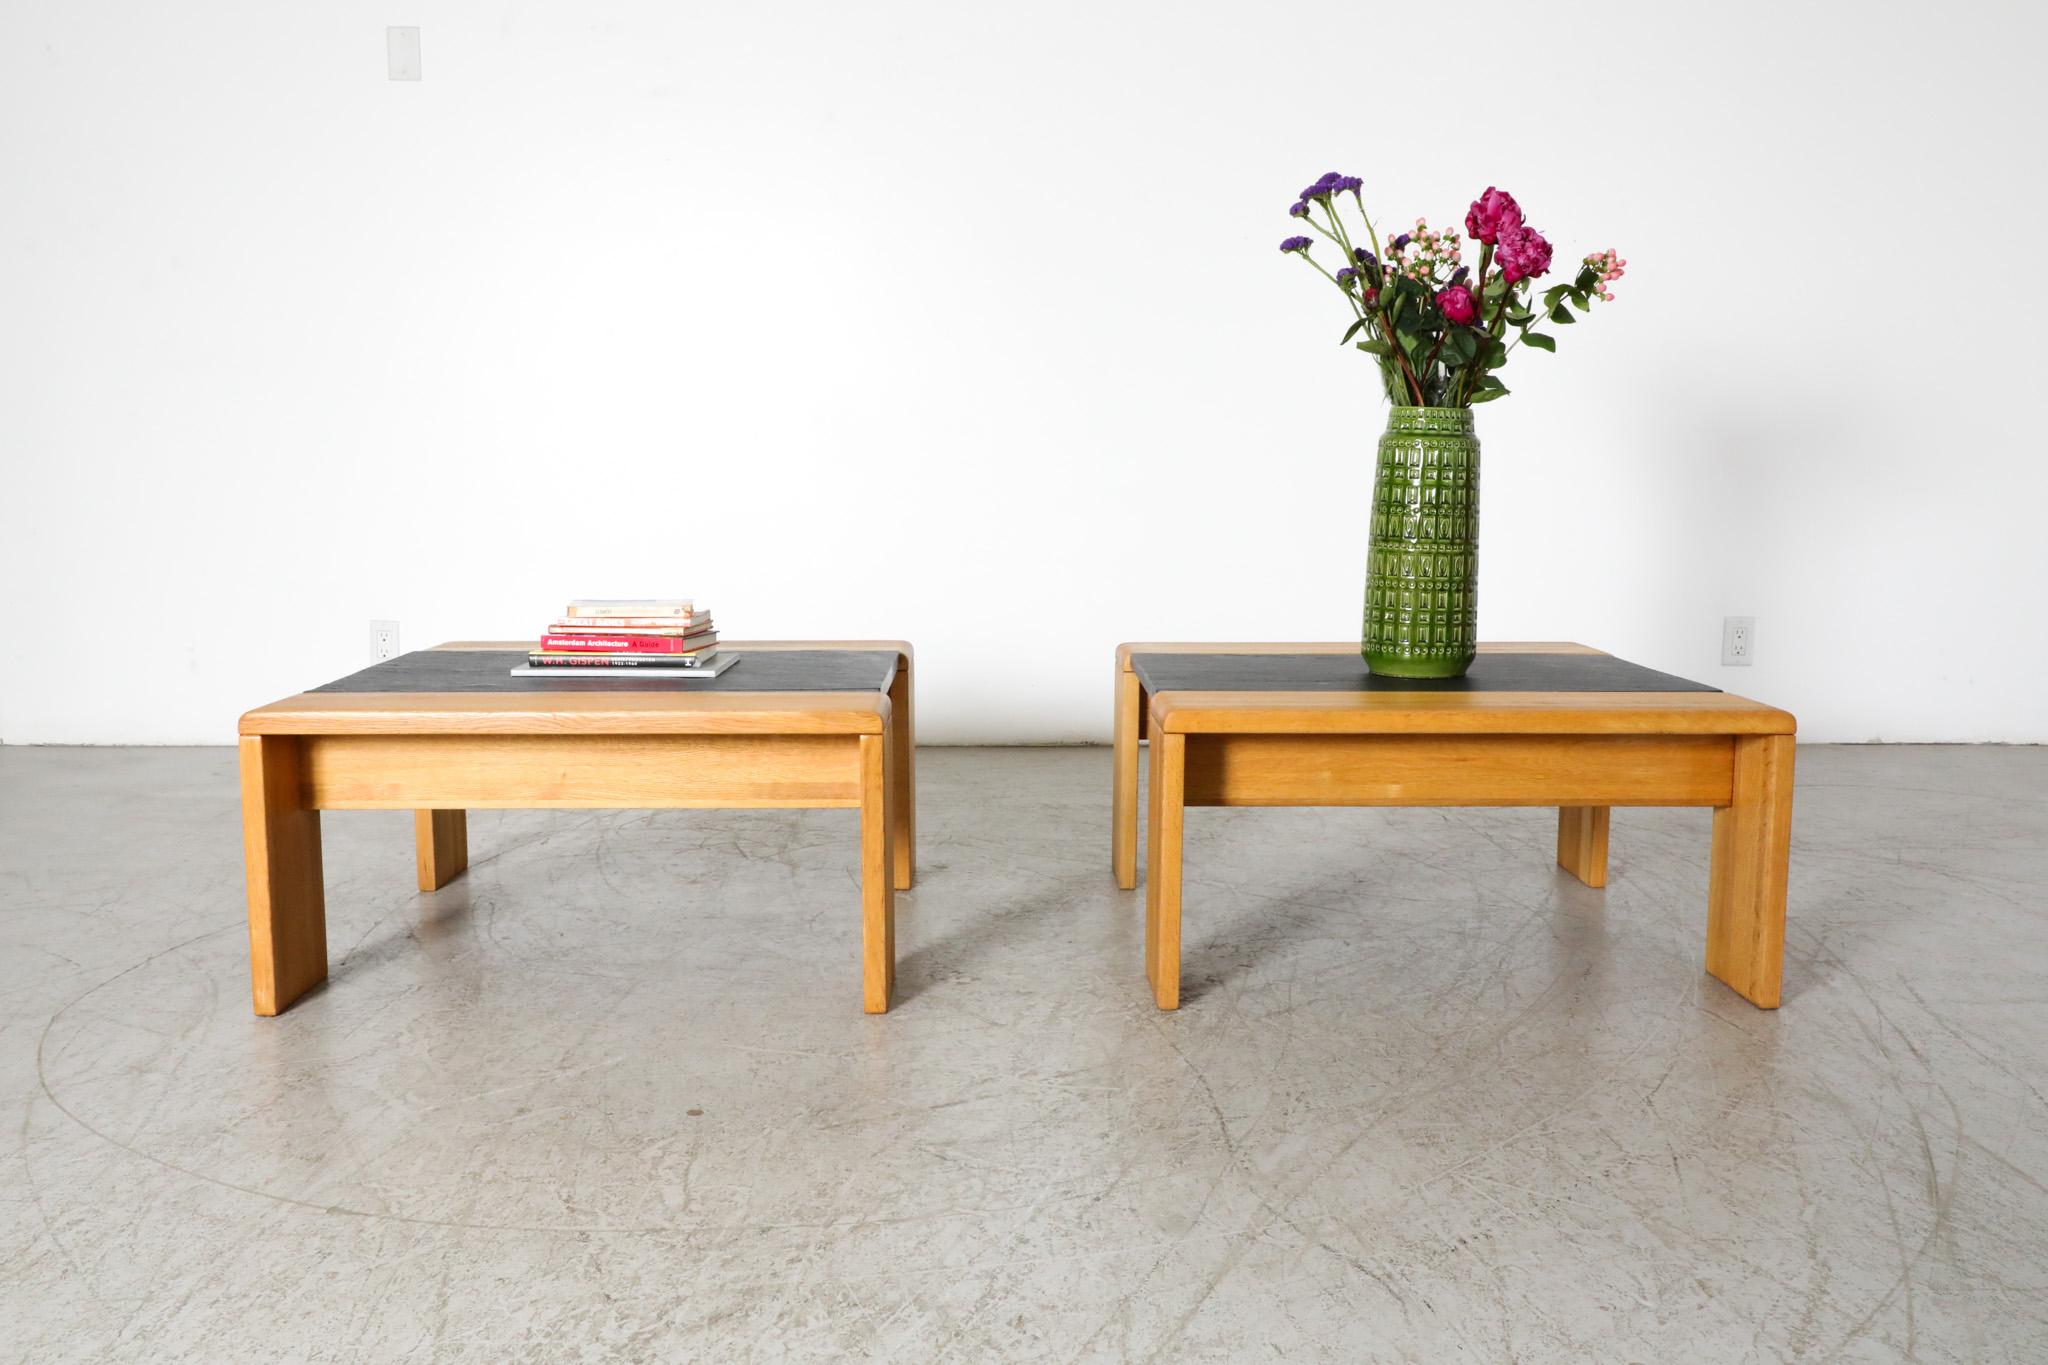 Pair of Mid-Century oak and stone side tables manufactured by dutch furniture maker Leolux. Echoes the work of Italy's Tobia Scarpa. These tables feature oak wood frames with inset slate stone tops resulting in a beautiful pairing of complementary